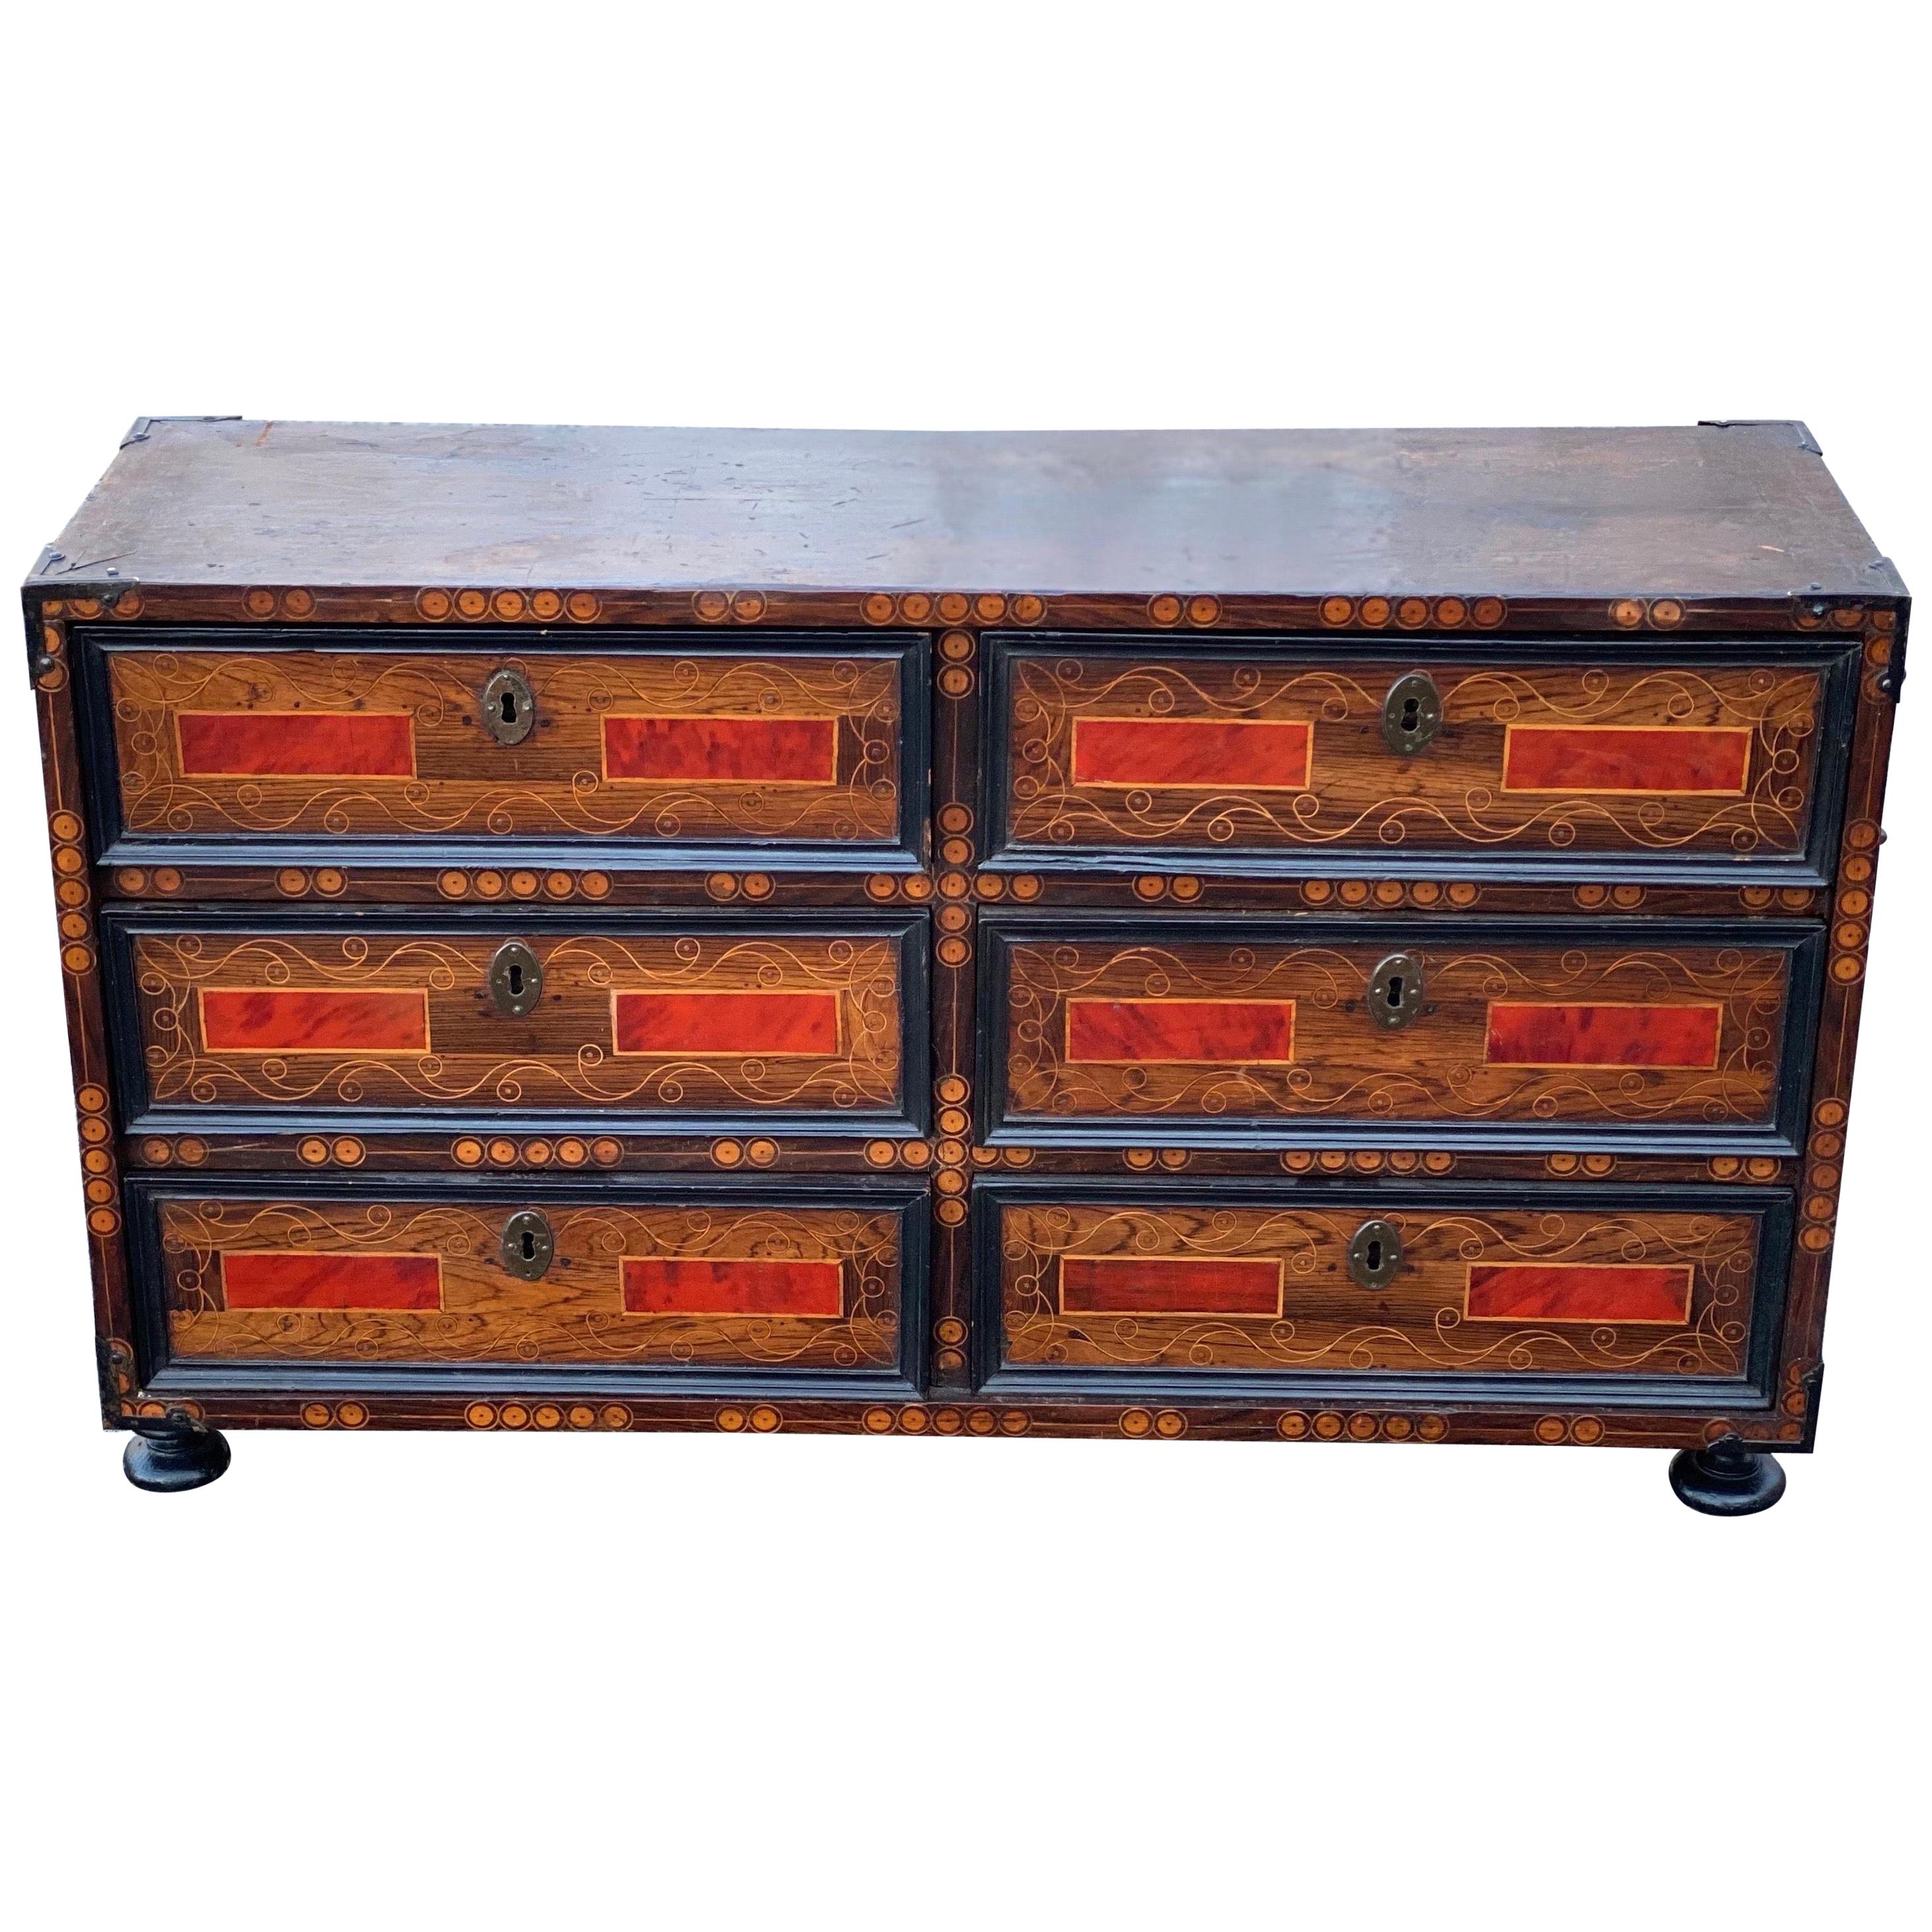 Early 18th Century Inlaid Italian Walnut and Tortoise Shell Vargueno For Sale